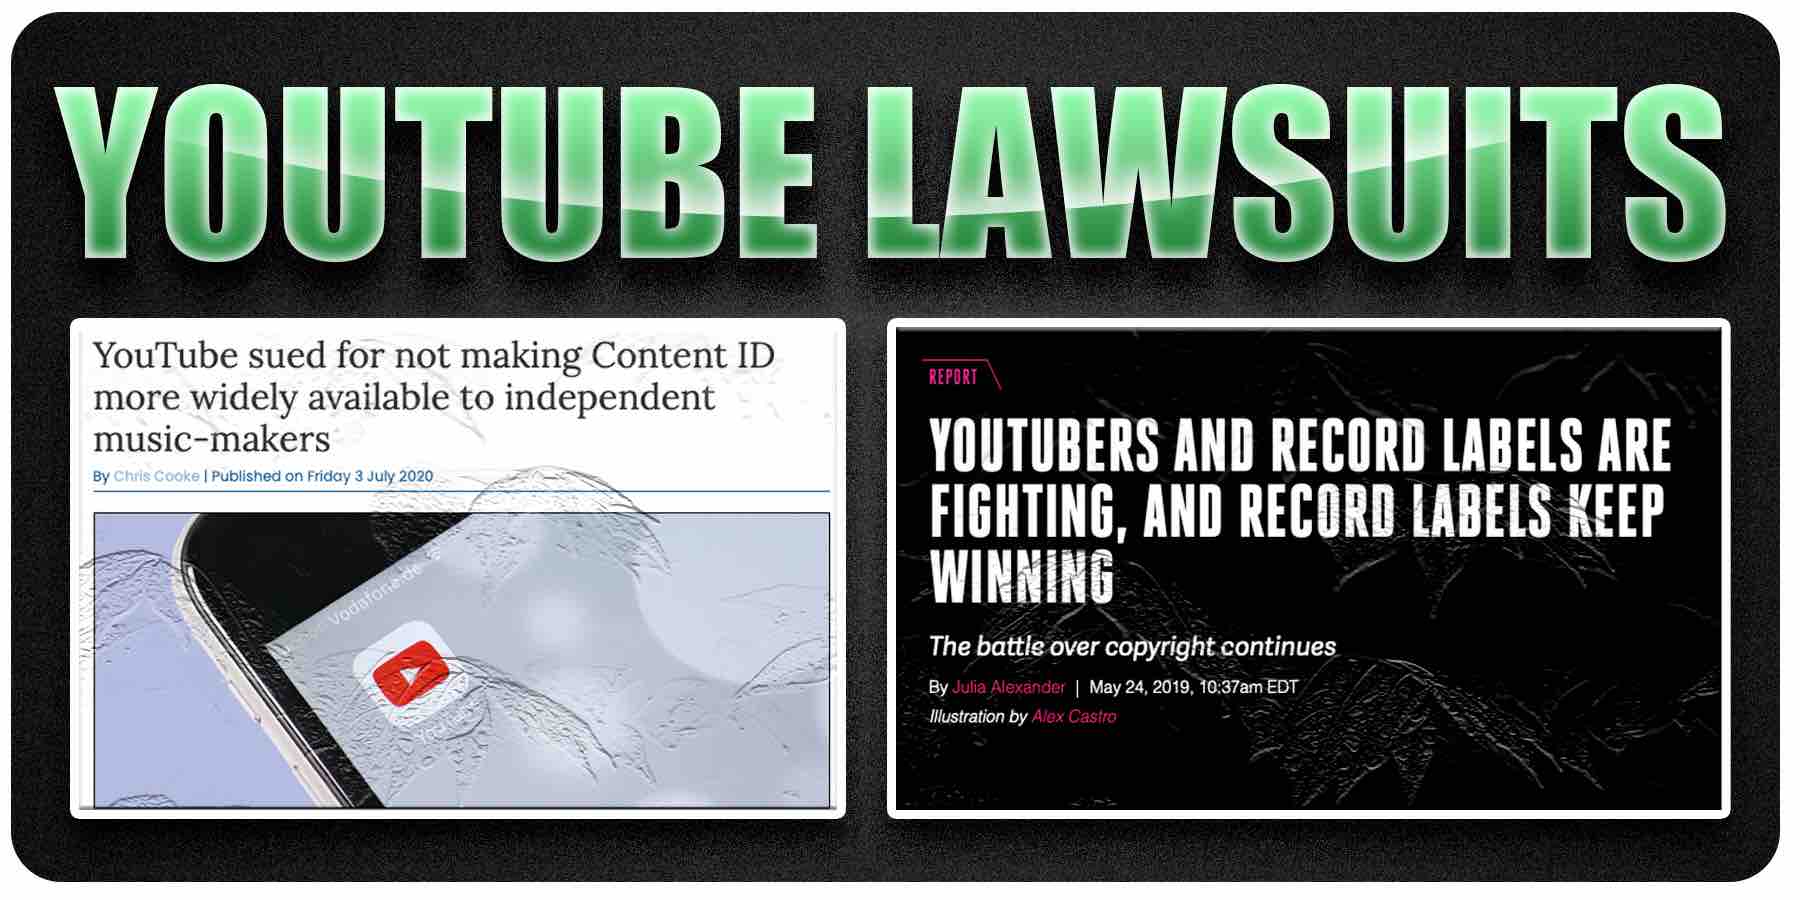 Youtube Copyright Lawsuits